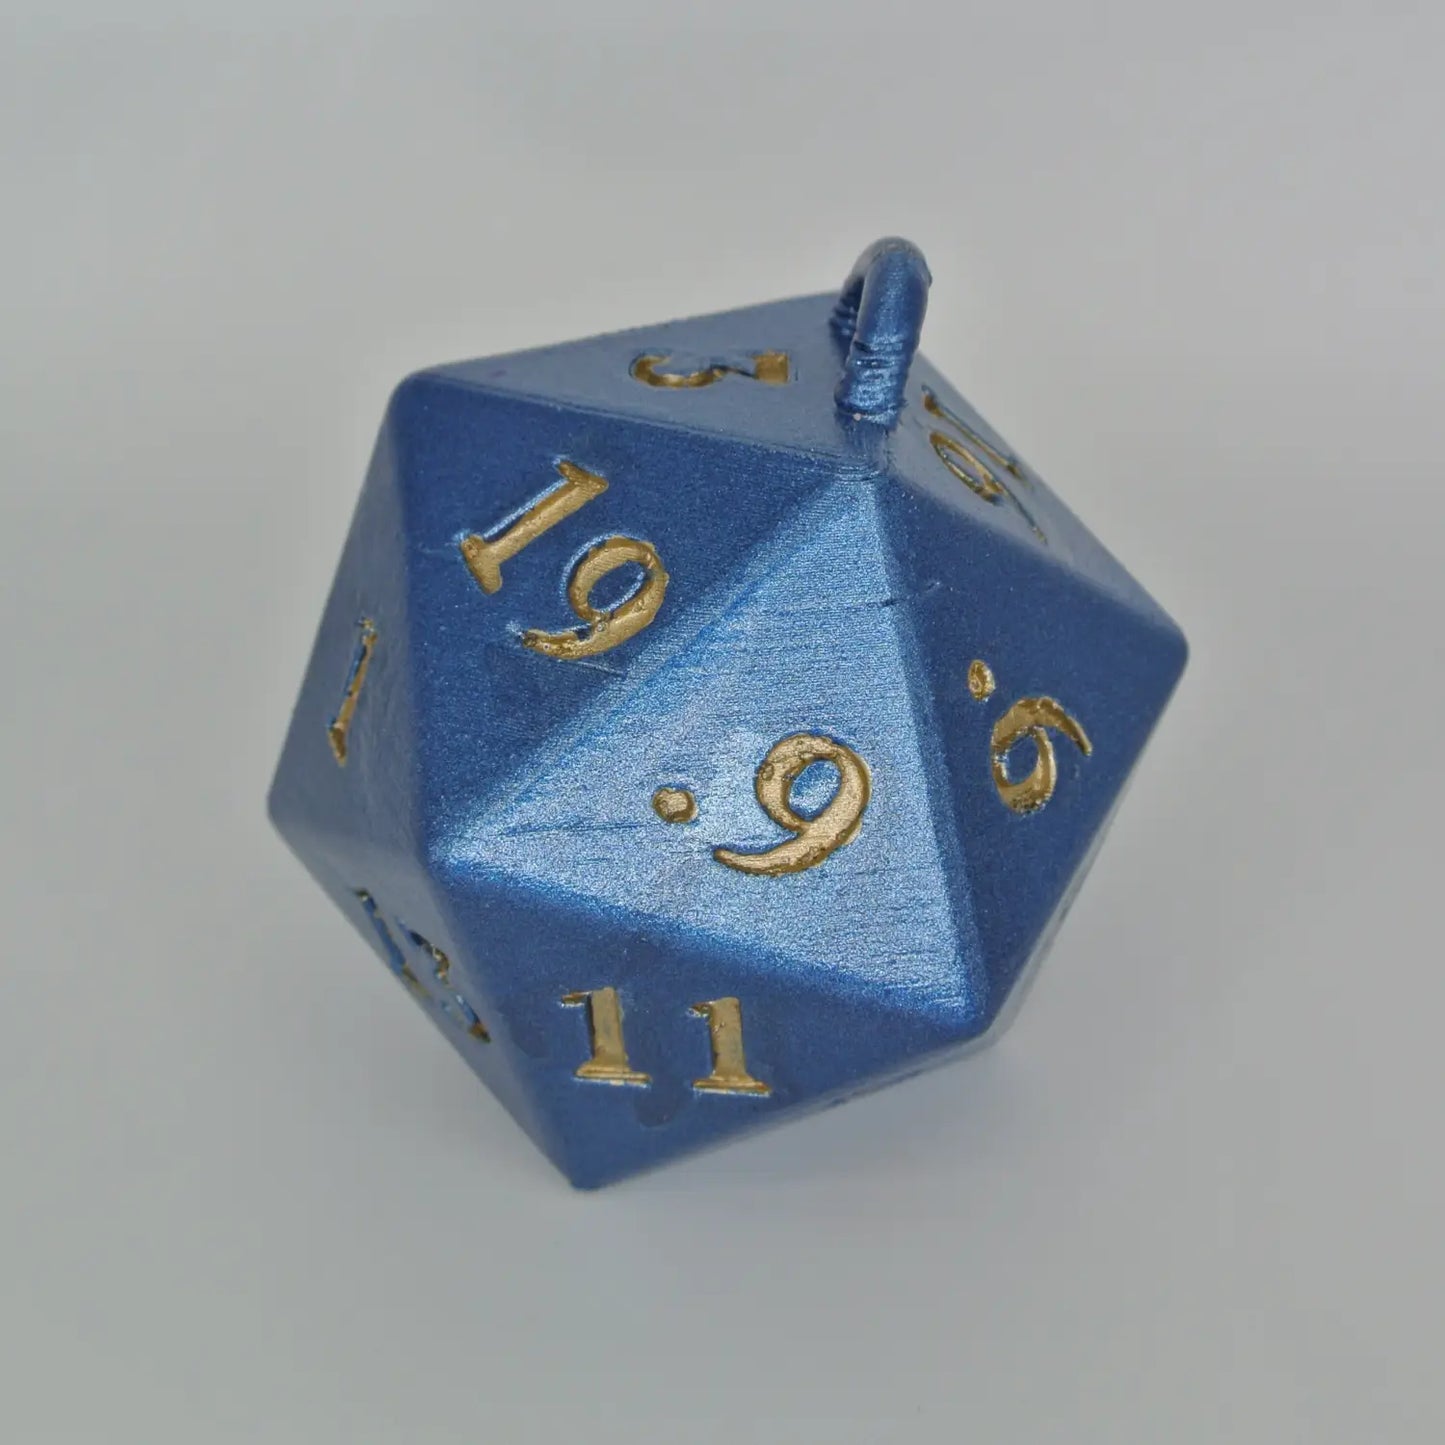 20 sided dice Christmas Ornament - Blue/Gold - Ornaments